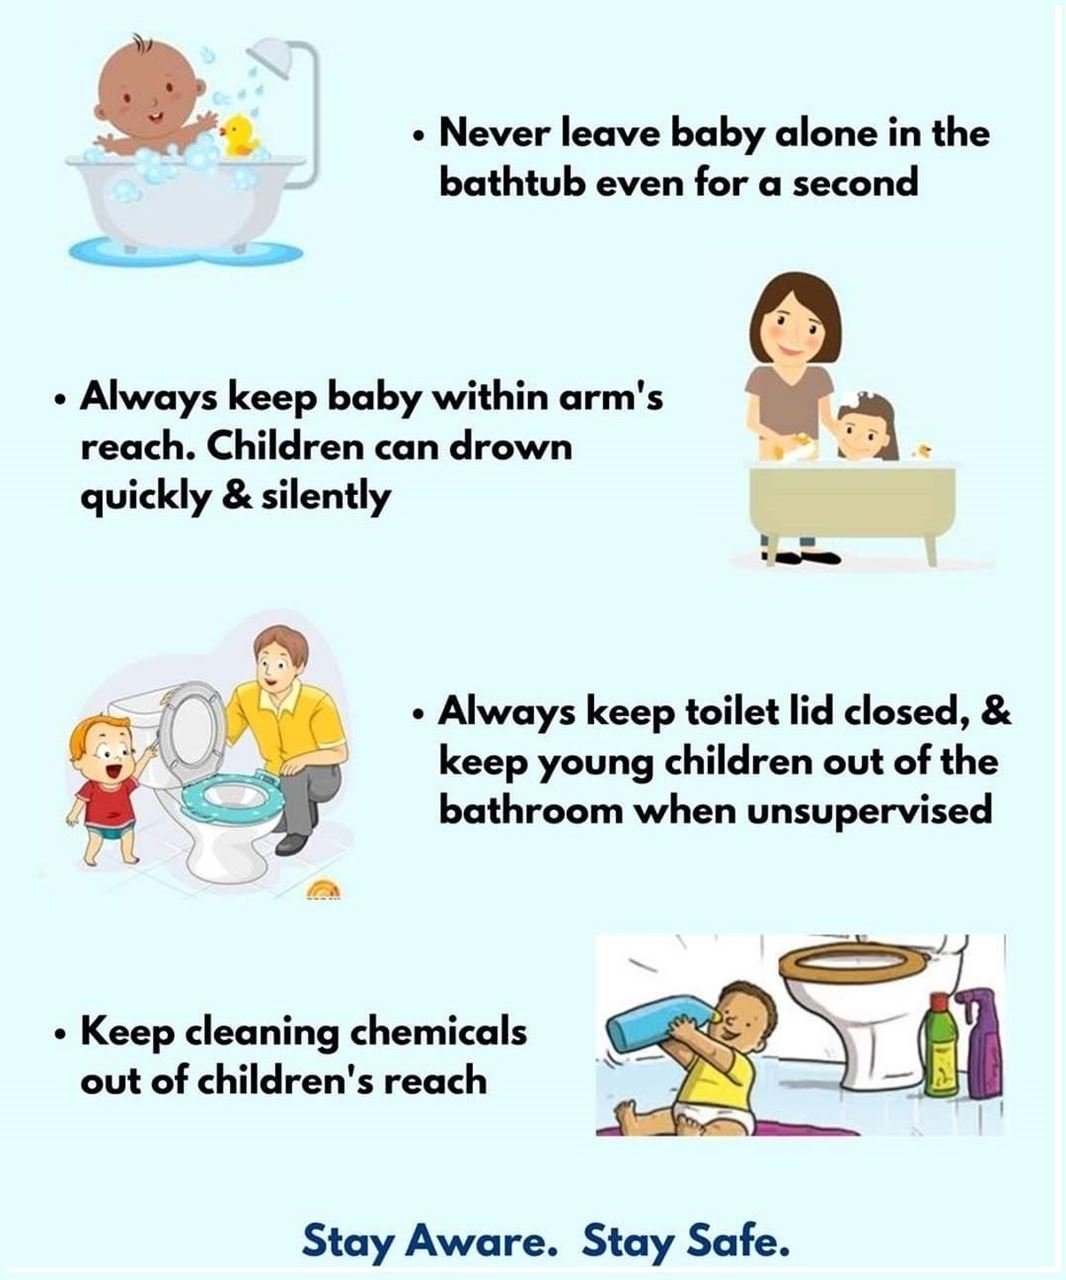 A poster describing how to keep babies and young children safe in the bathroom